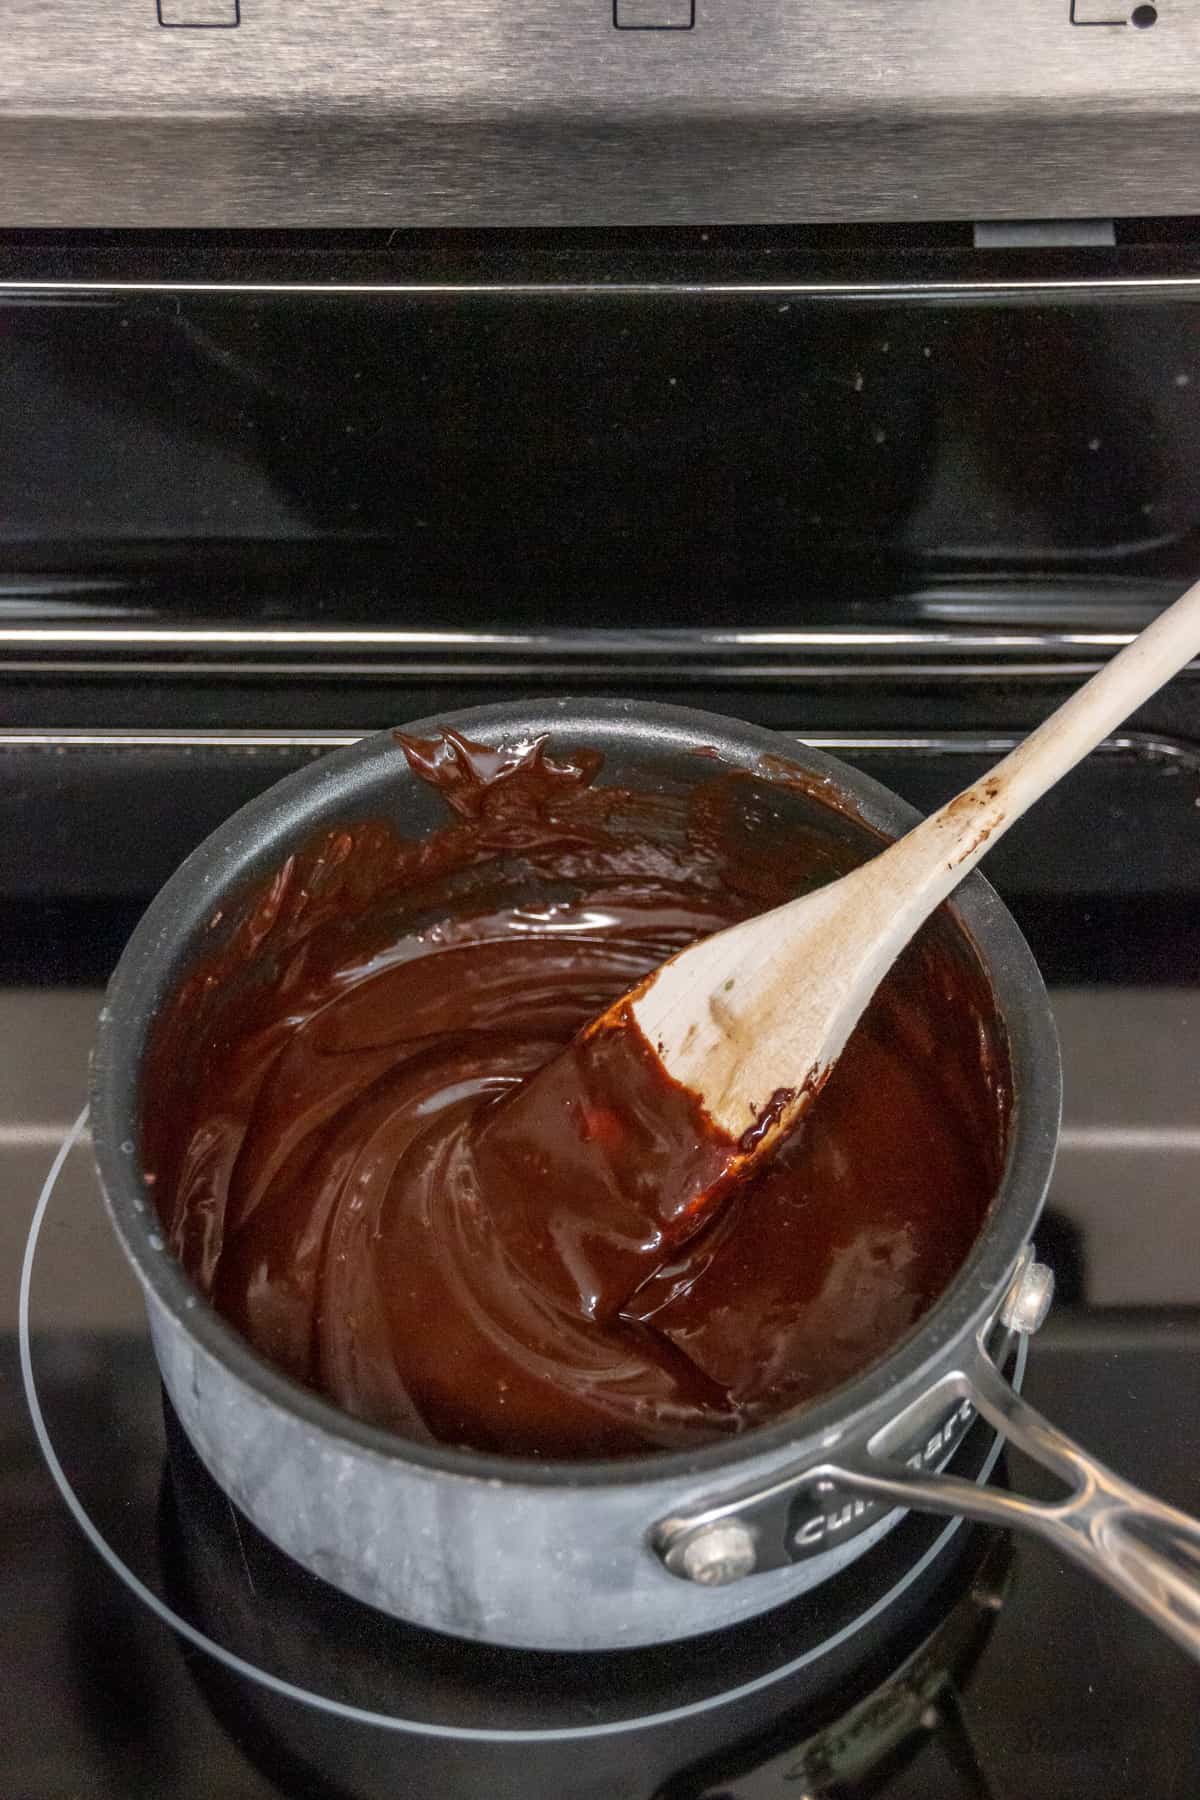 Melted chocolate and cream in a saucepan with a wooden spoon.